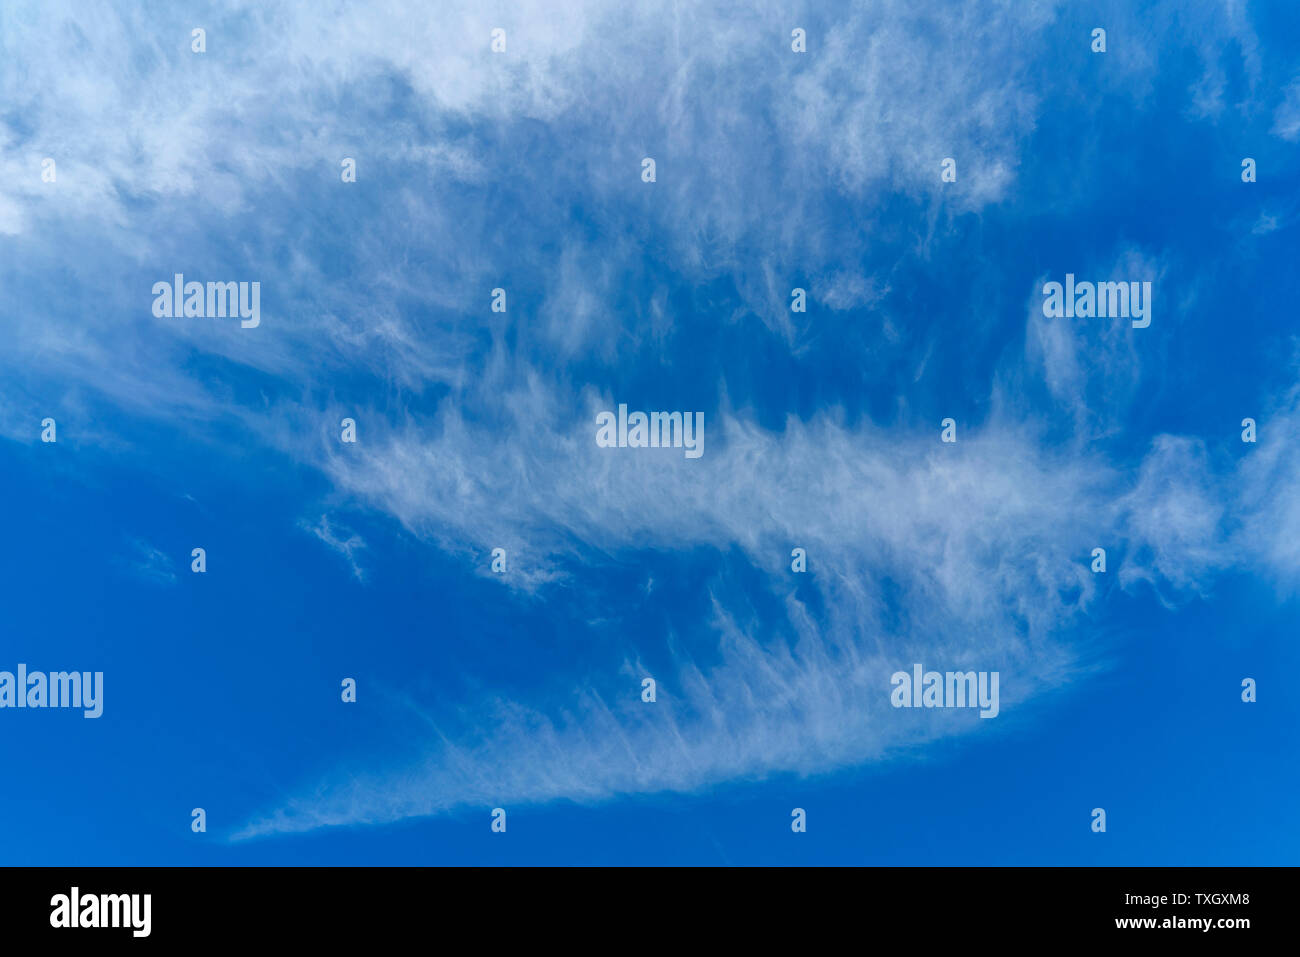 White clouds in the blue sky. Atmospheric phenomenon. Stock Photo